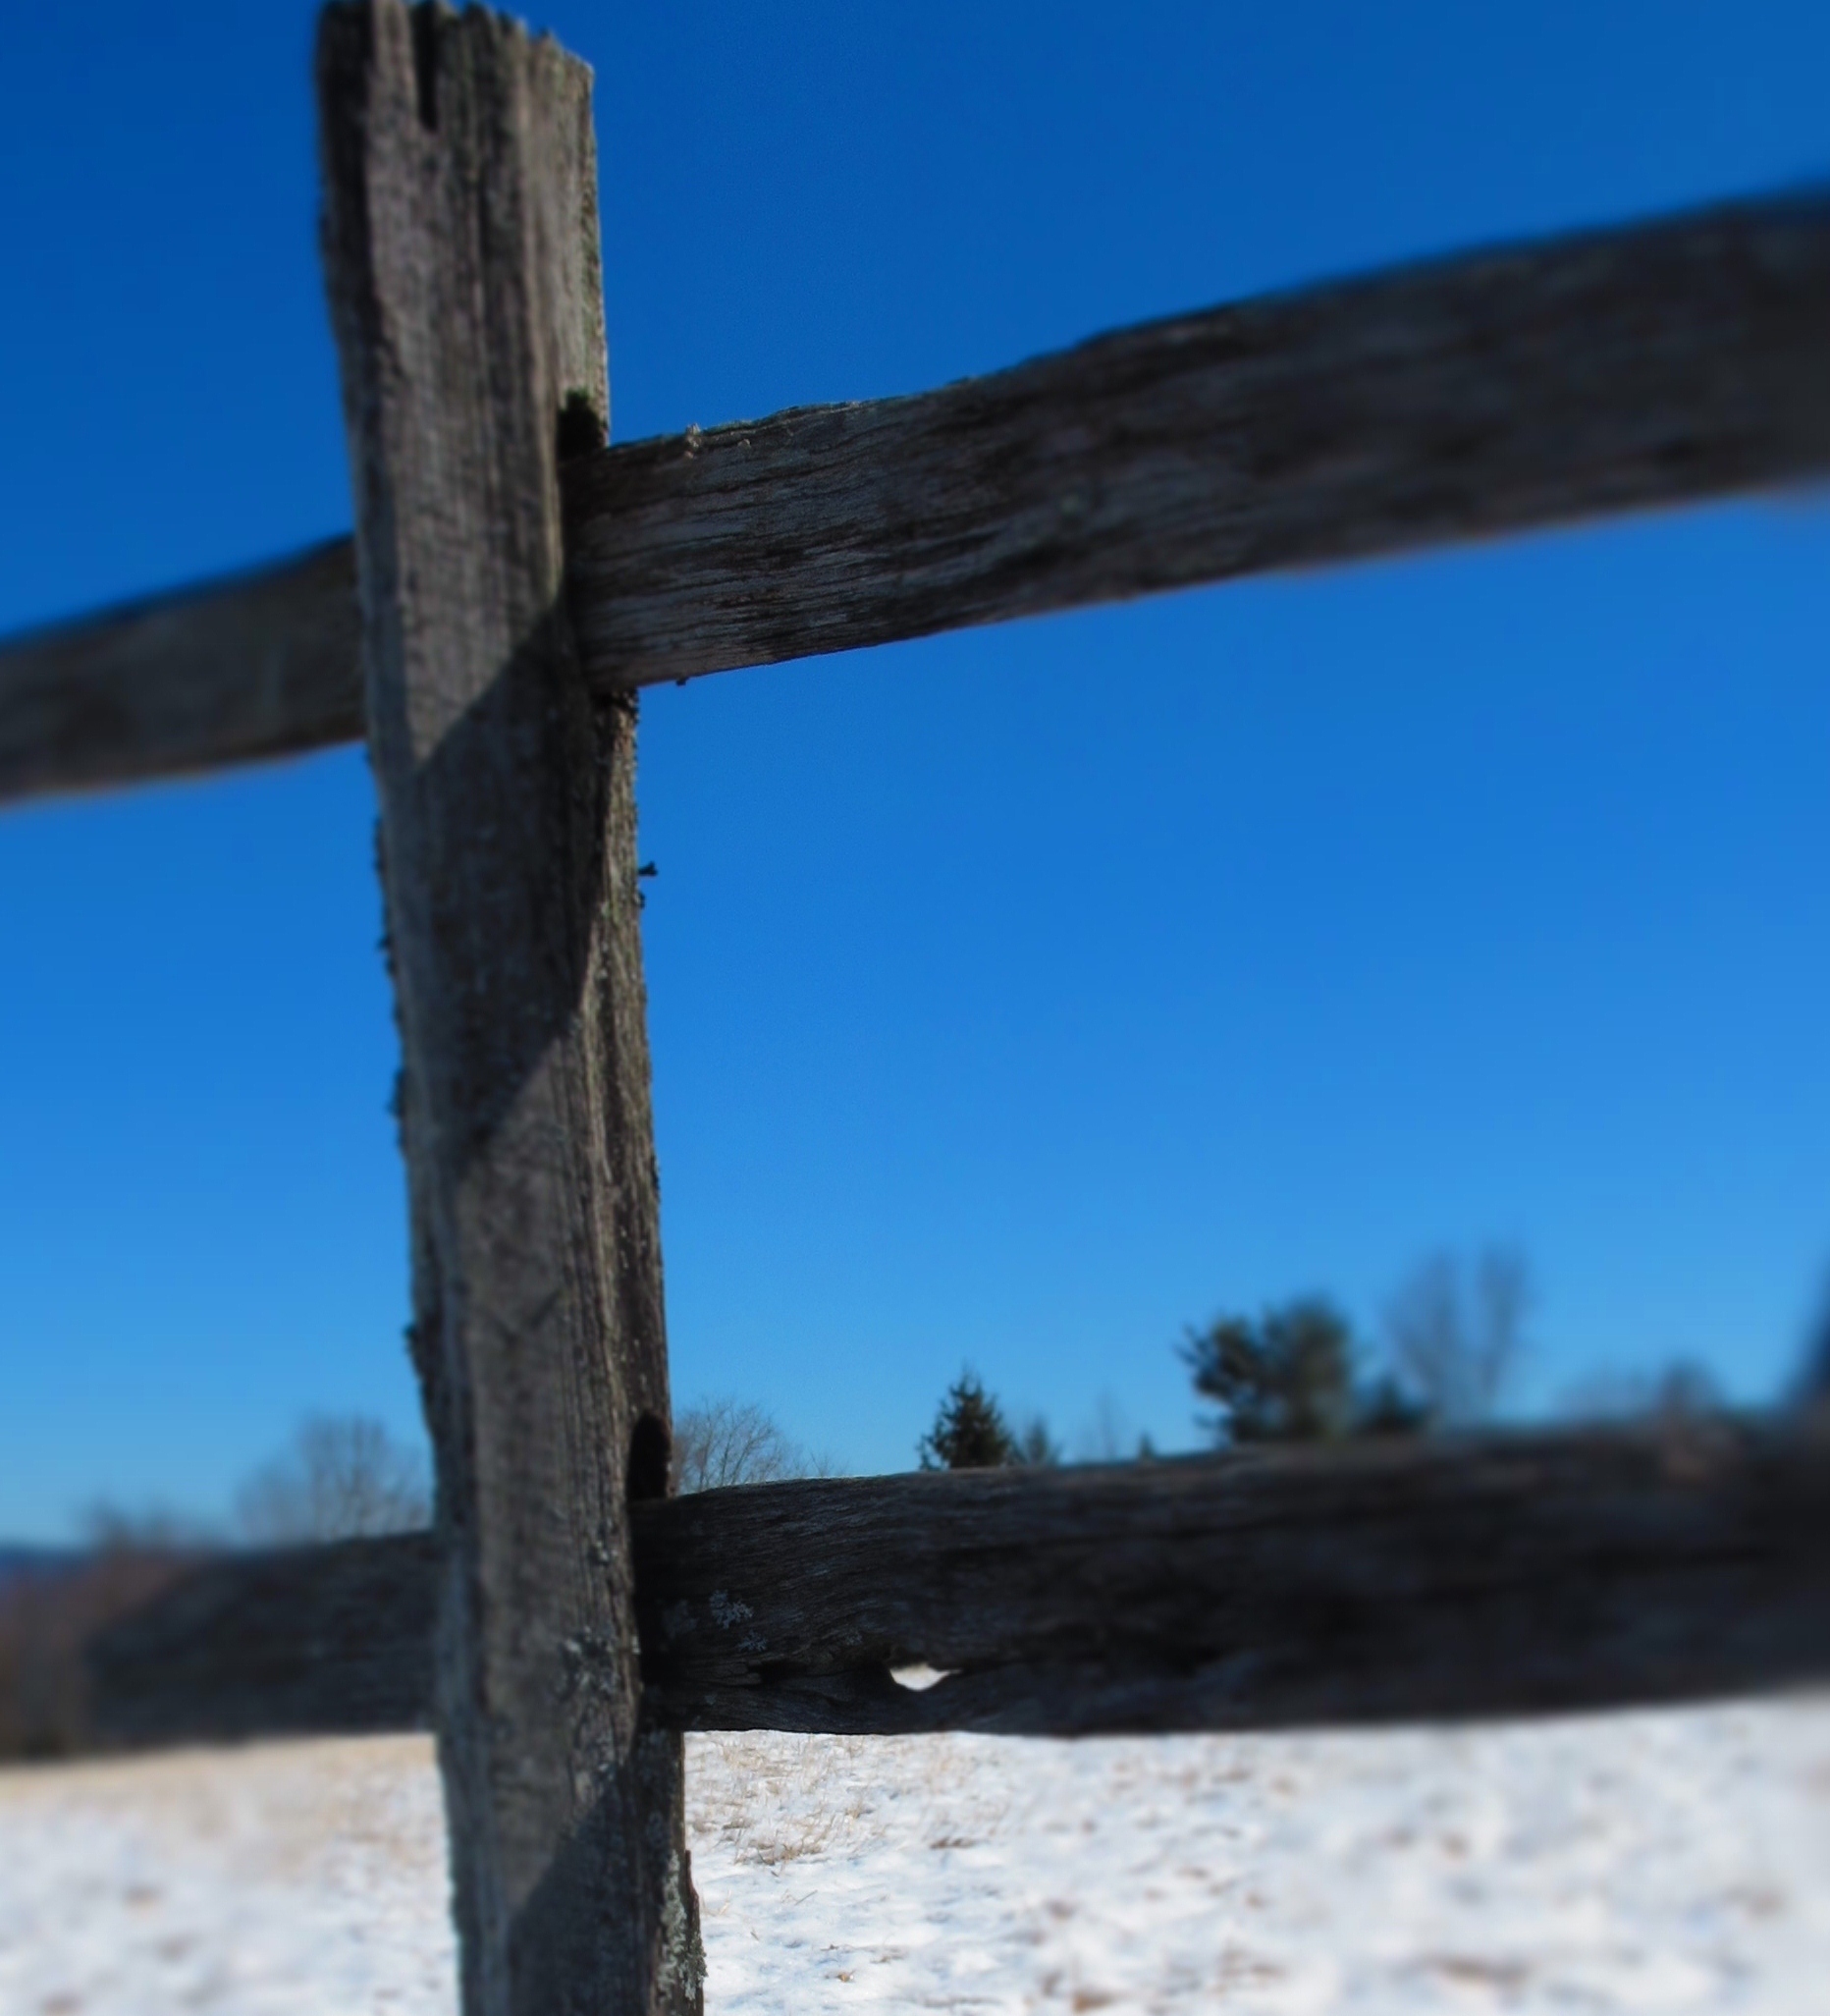 Fence And Blue Sky (user submitted)